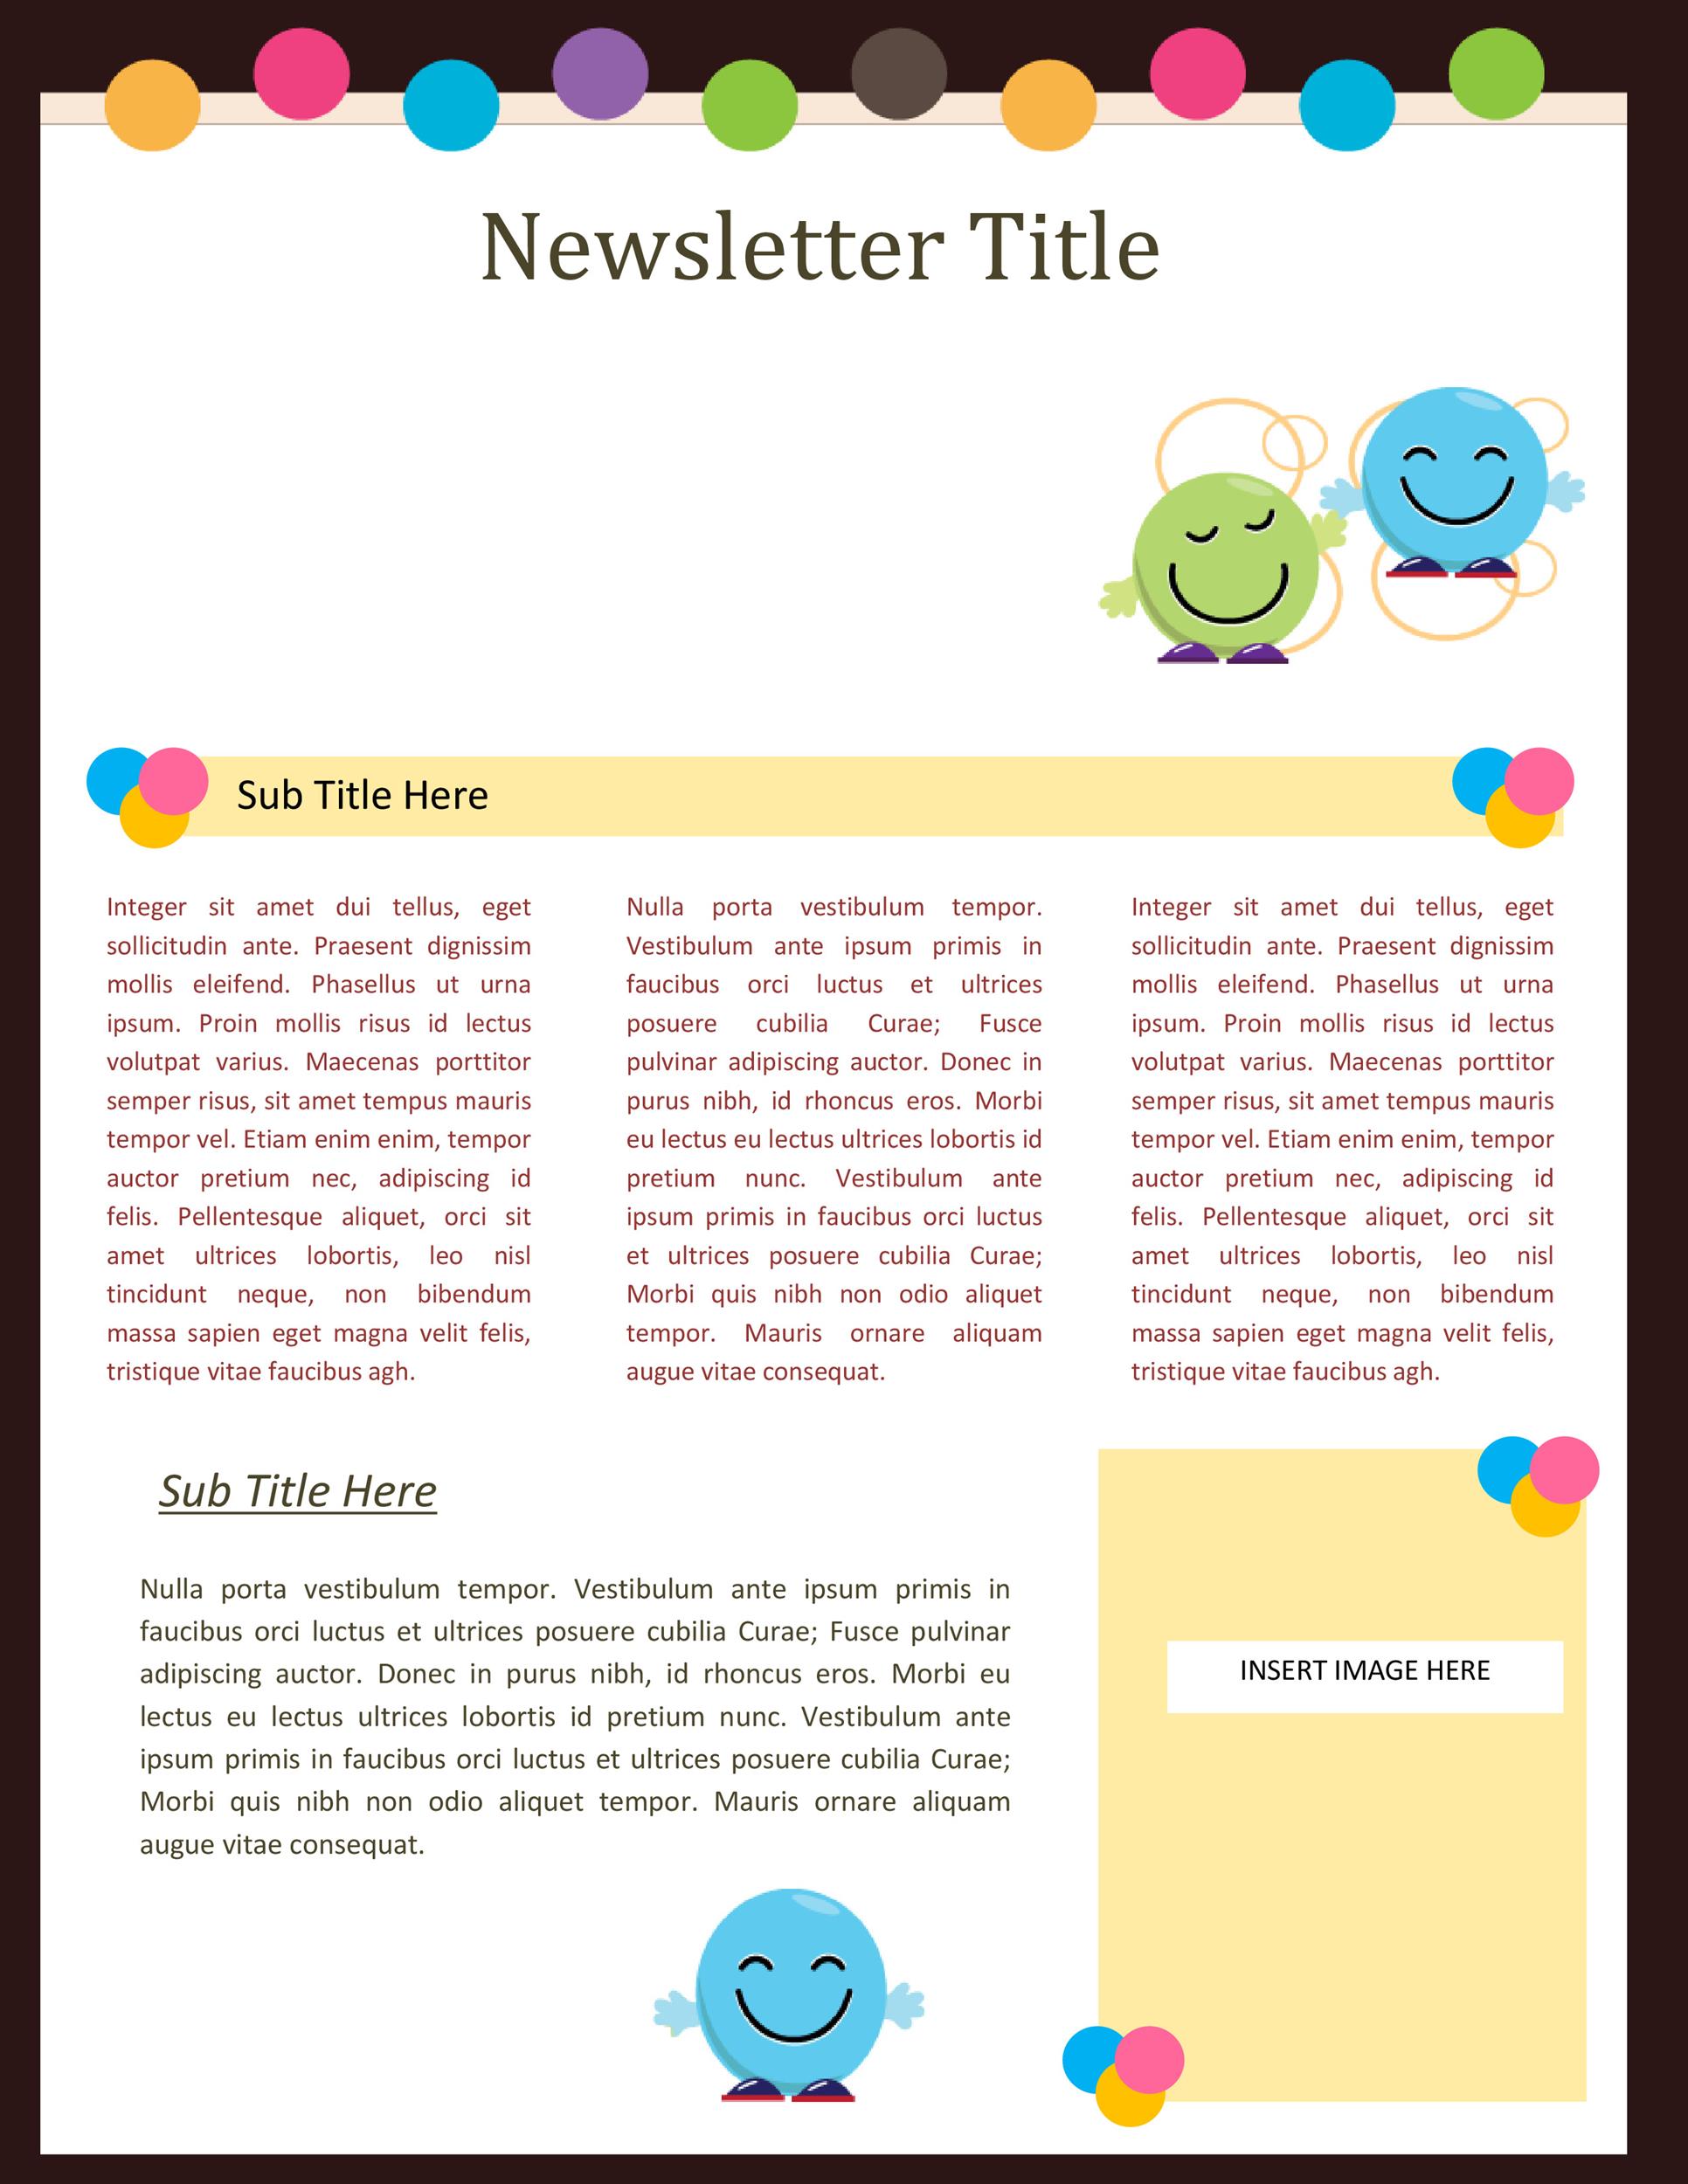 50 FREE Newsletter Templates for Work, School and Classroom